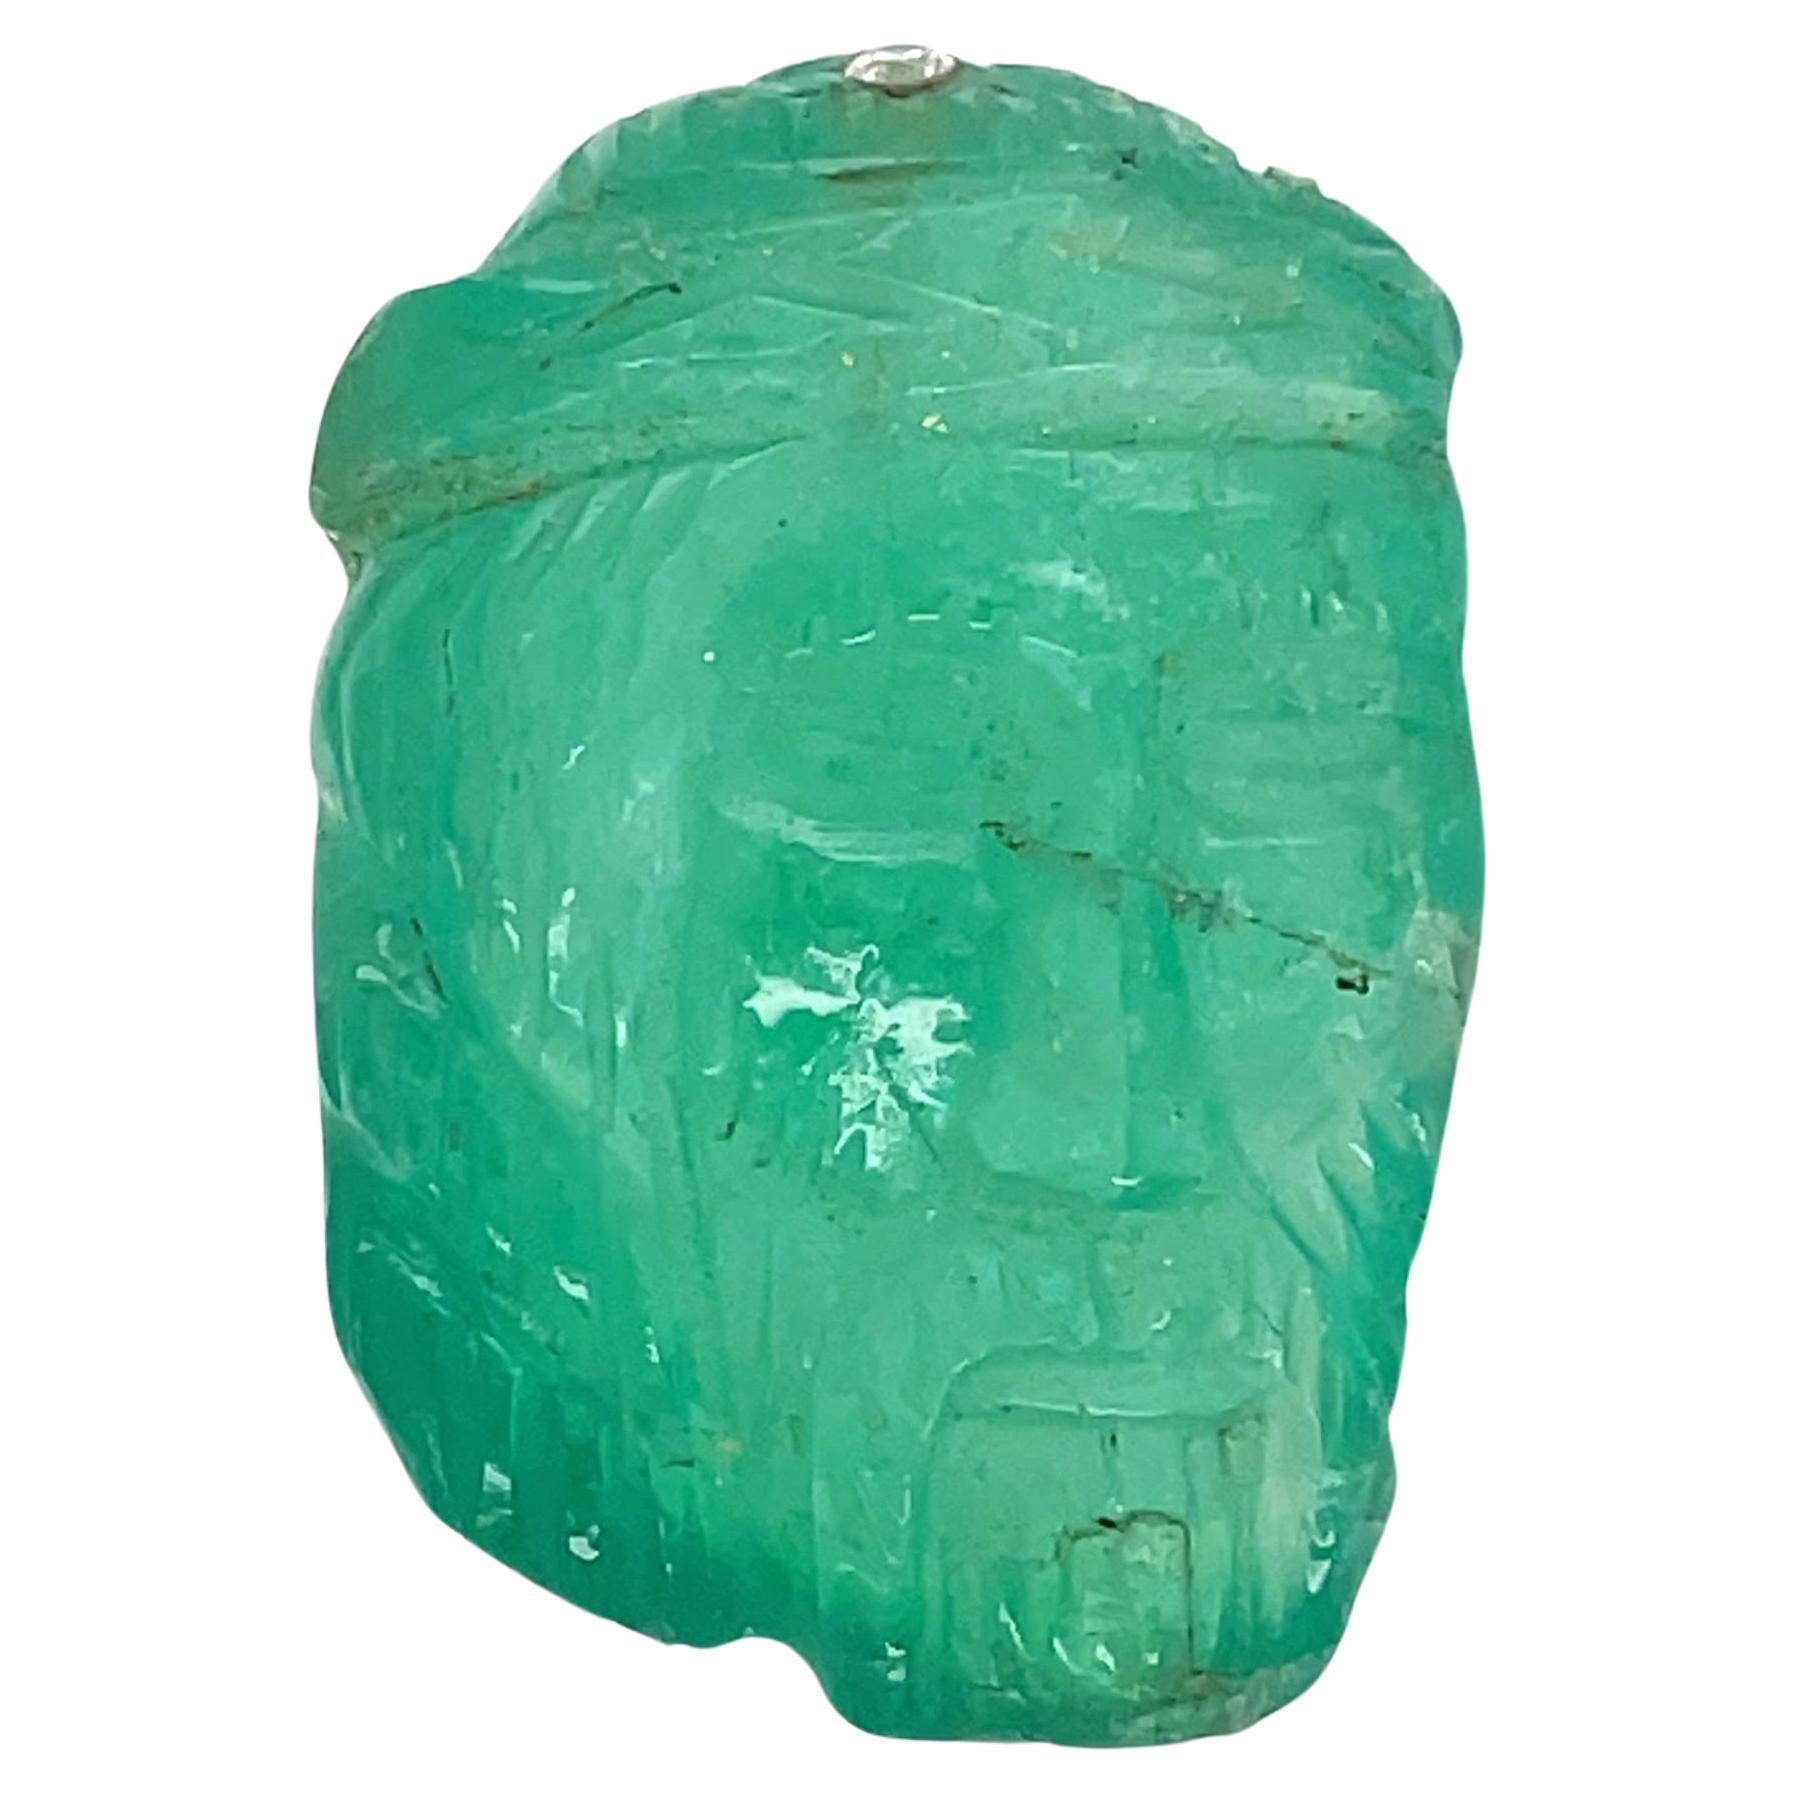 This exquisitely carved emerald, weighing a remarkable 60.84 carats, beautifully captures the image of Jesus Christ.

Originating from the verdant landscapes of Colombia, South America.

It is a holy gemstone that stands for salvation, hope, and